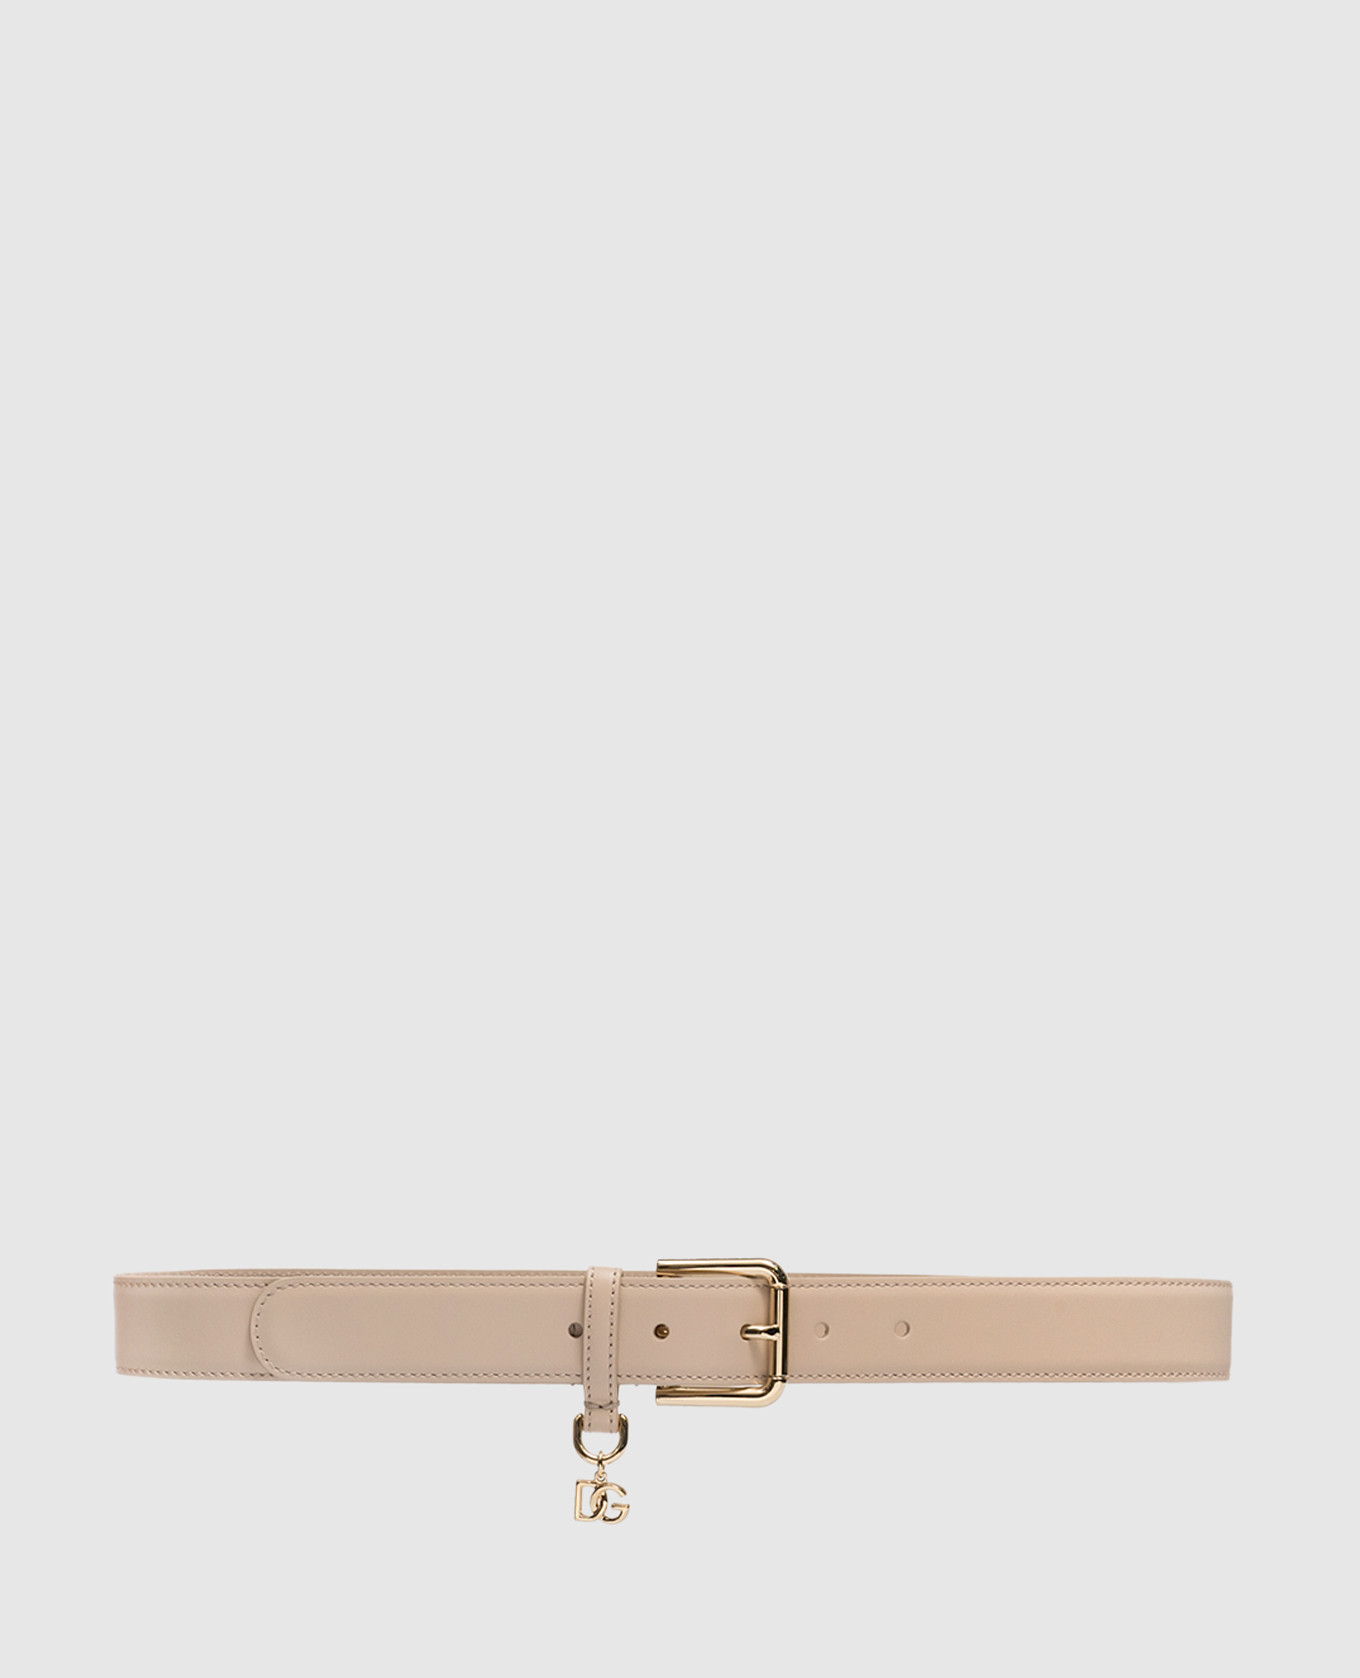 Beige leather belt with logo